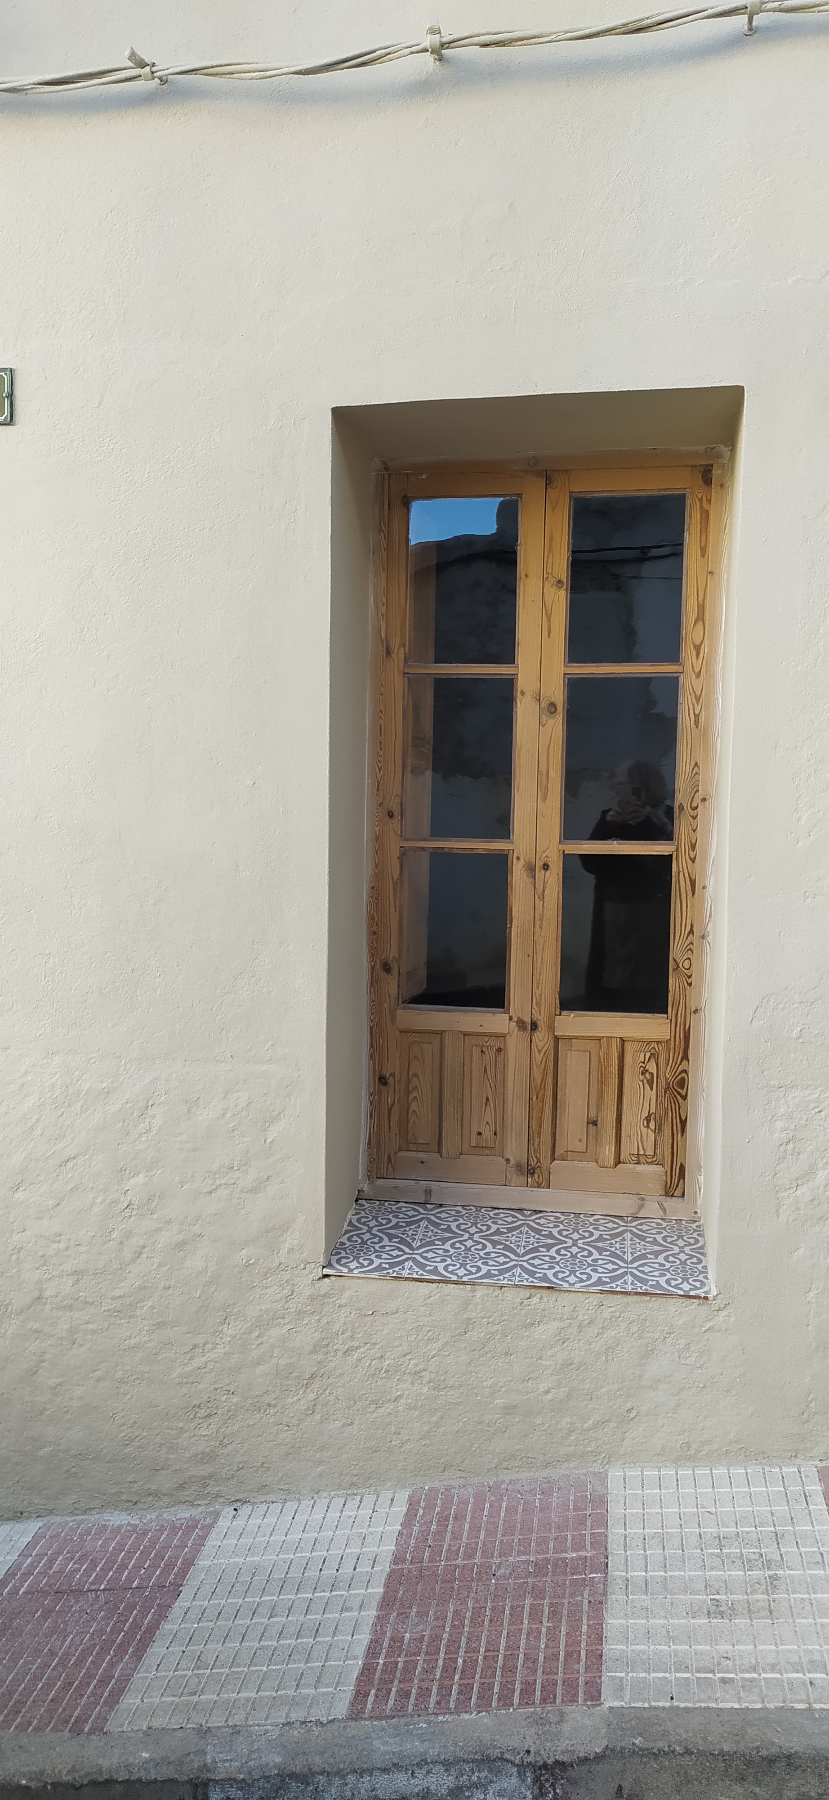 Reformed Townhouse 20 Minutes From Javea